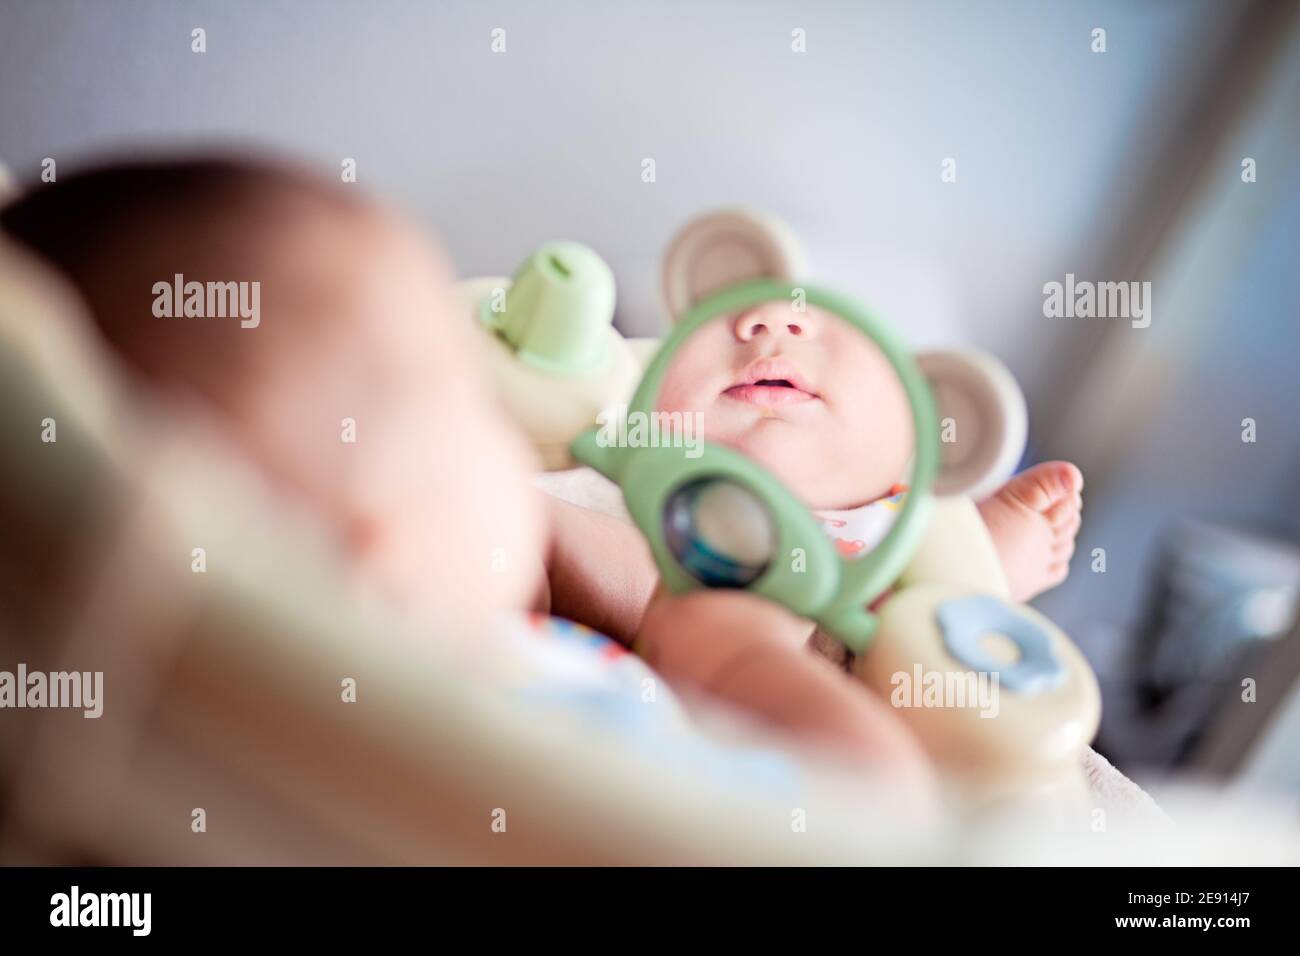 4 month old baby looking at himself in the mirror. Stock Photo